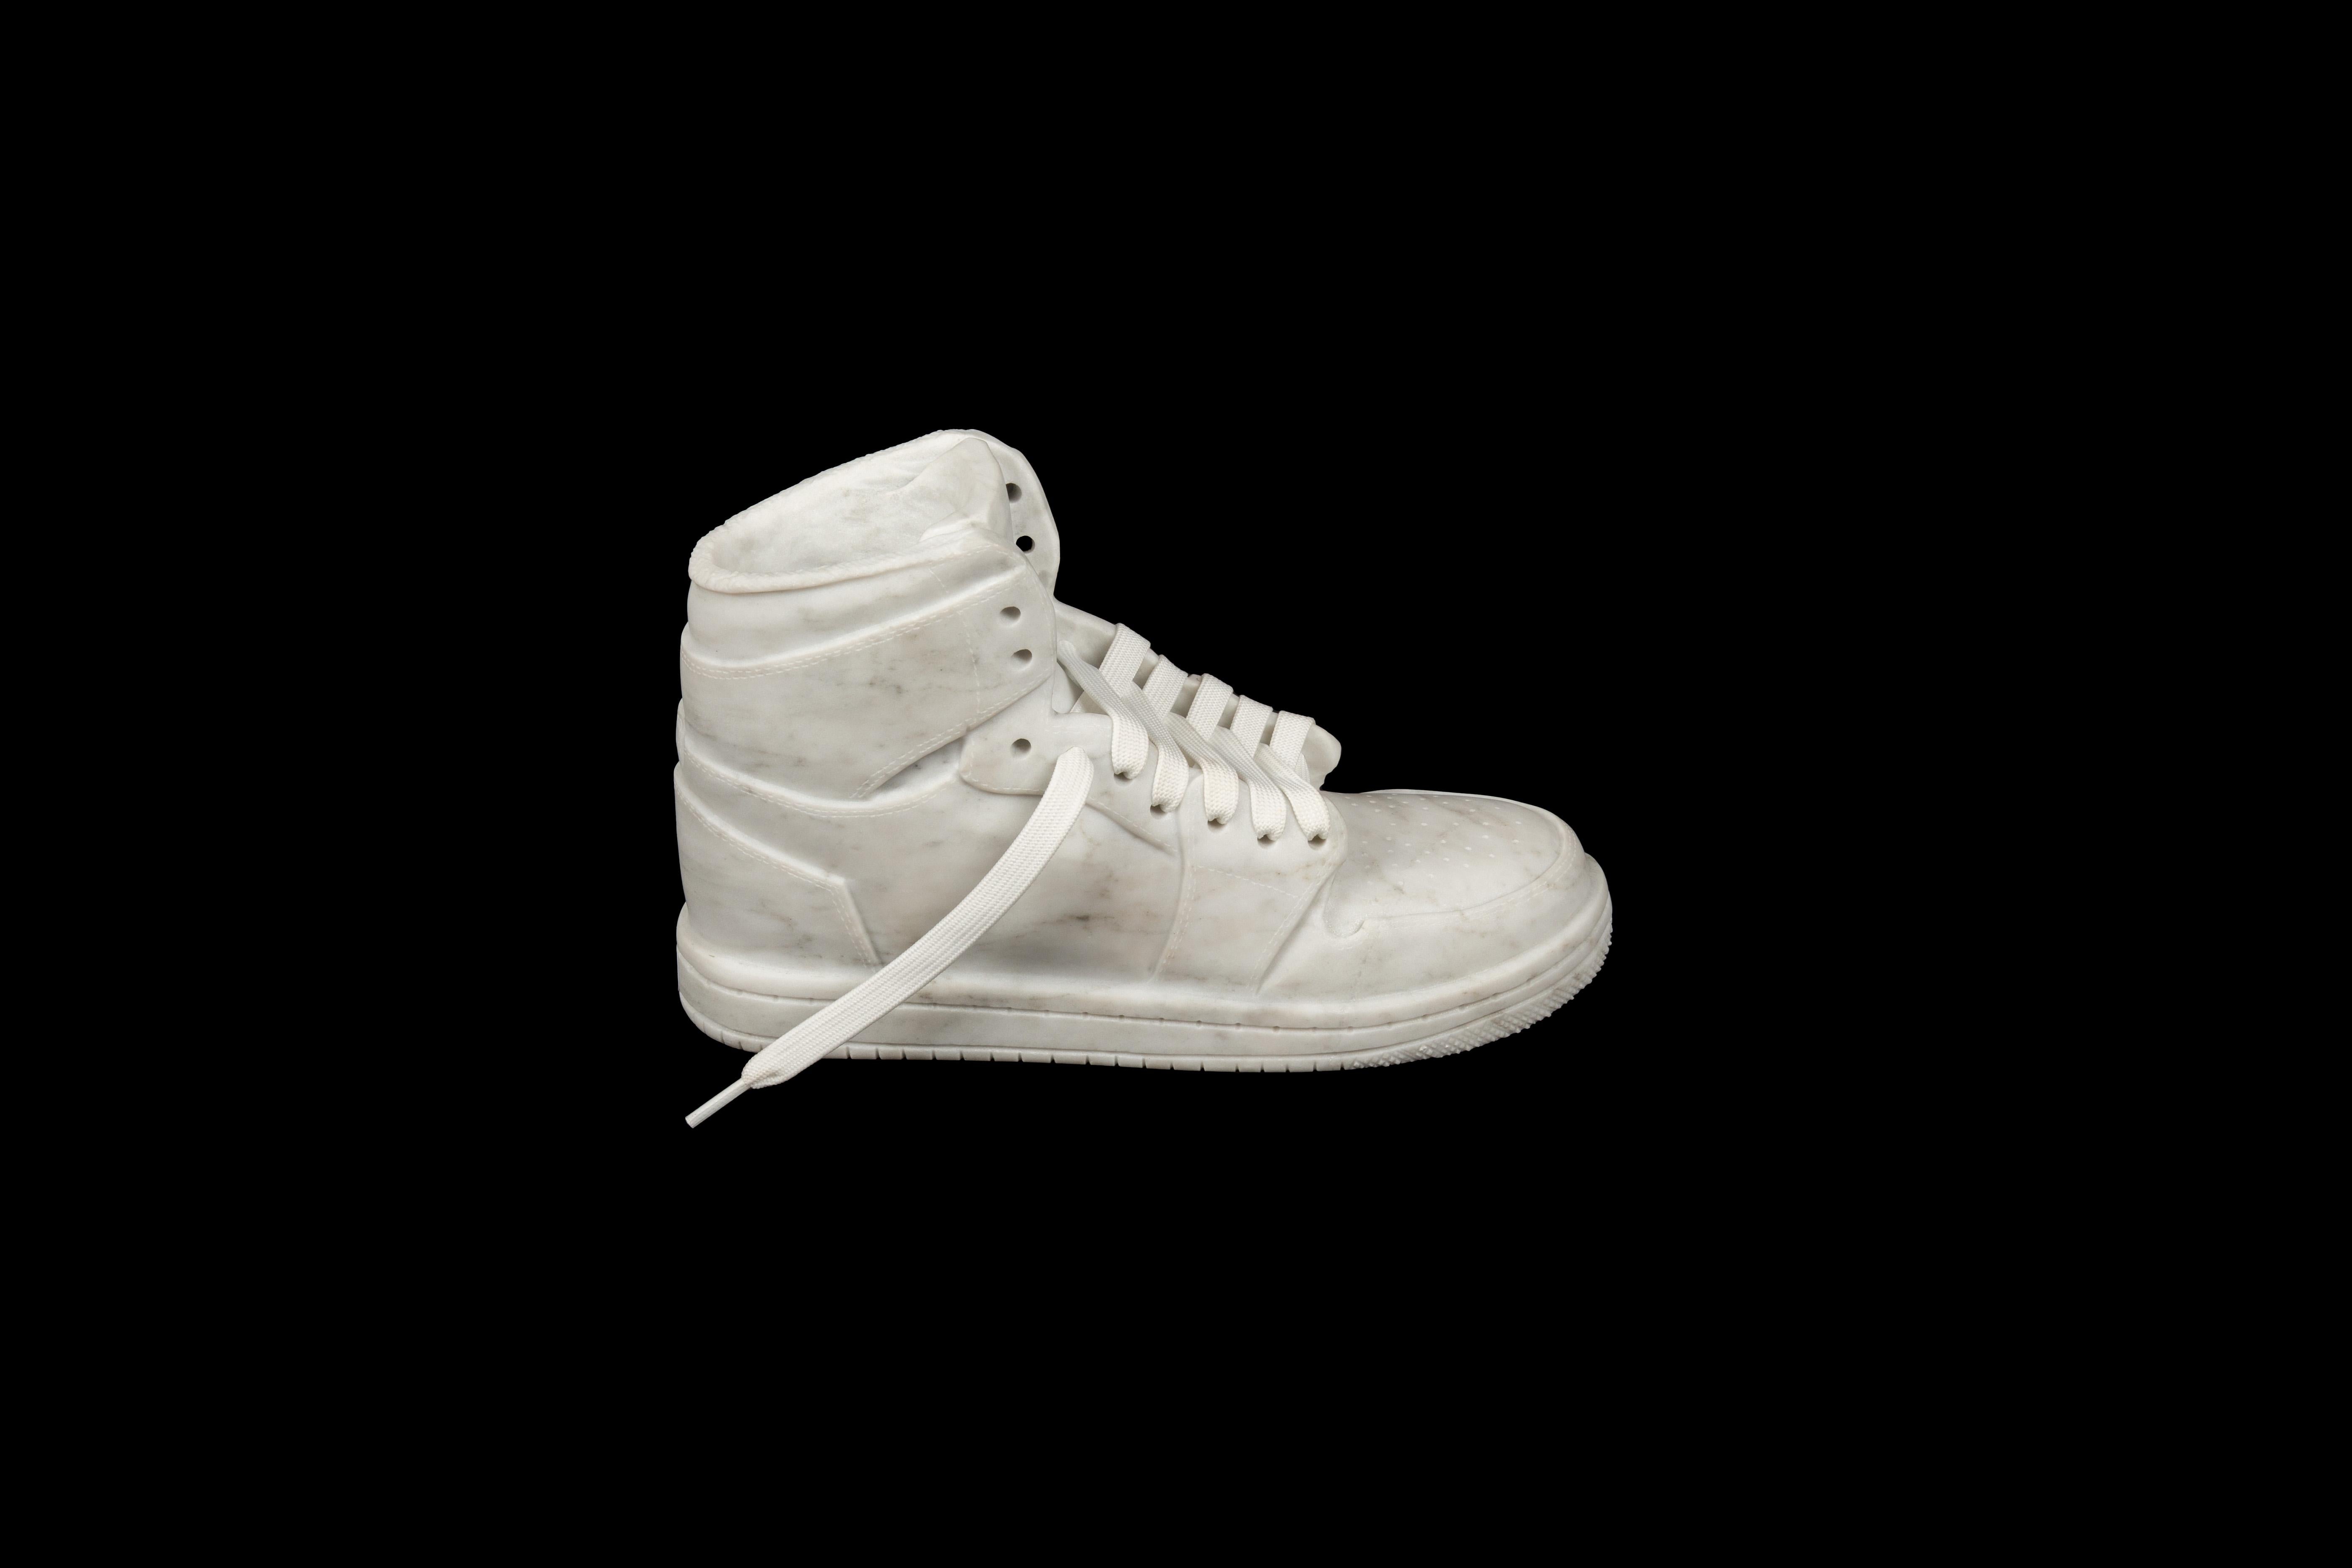 21st Century Carved White Marble Hightop Sneaker Sculpture: This sculpture serves as a captivating symbol of the enduring appeal and cultural significance of footwear, elevating the mundane to the realm of high art and inspiring contemplation on the